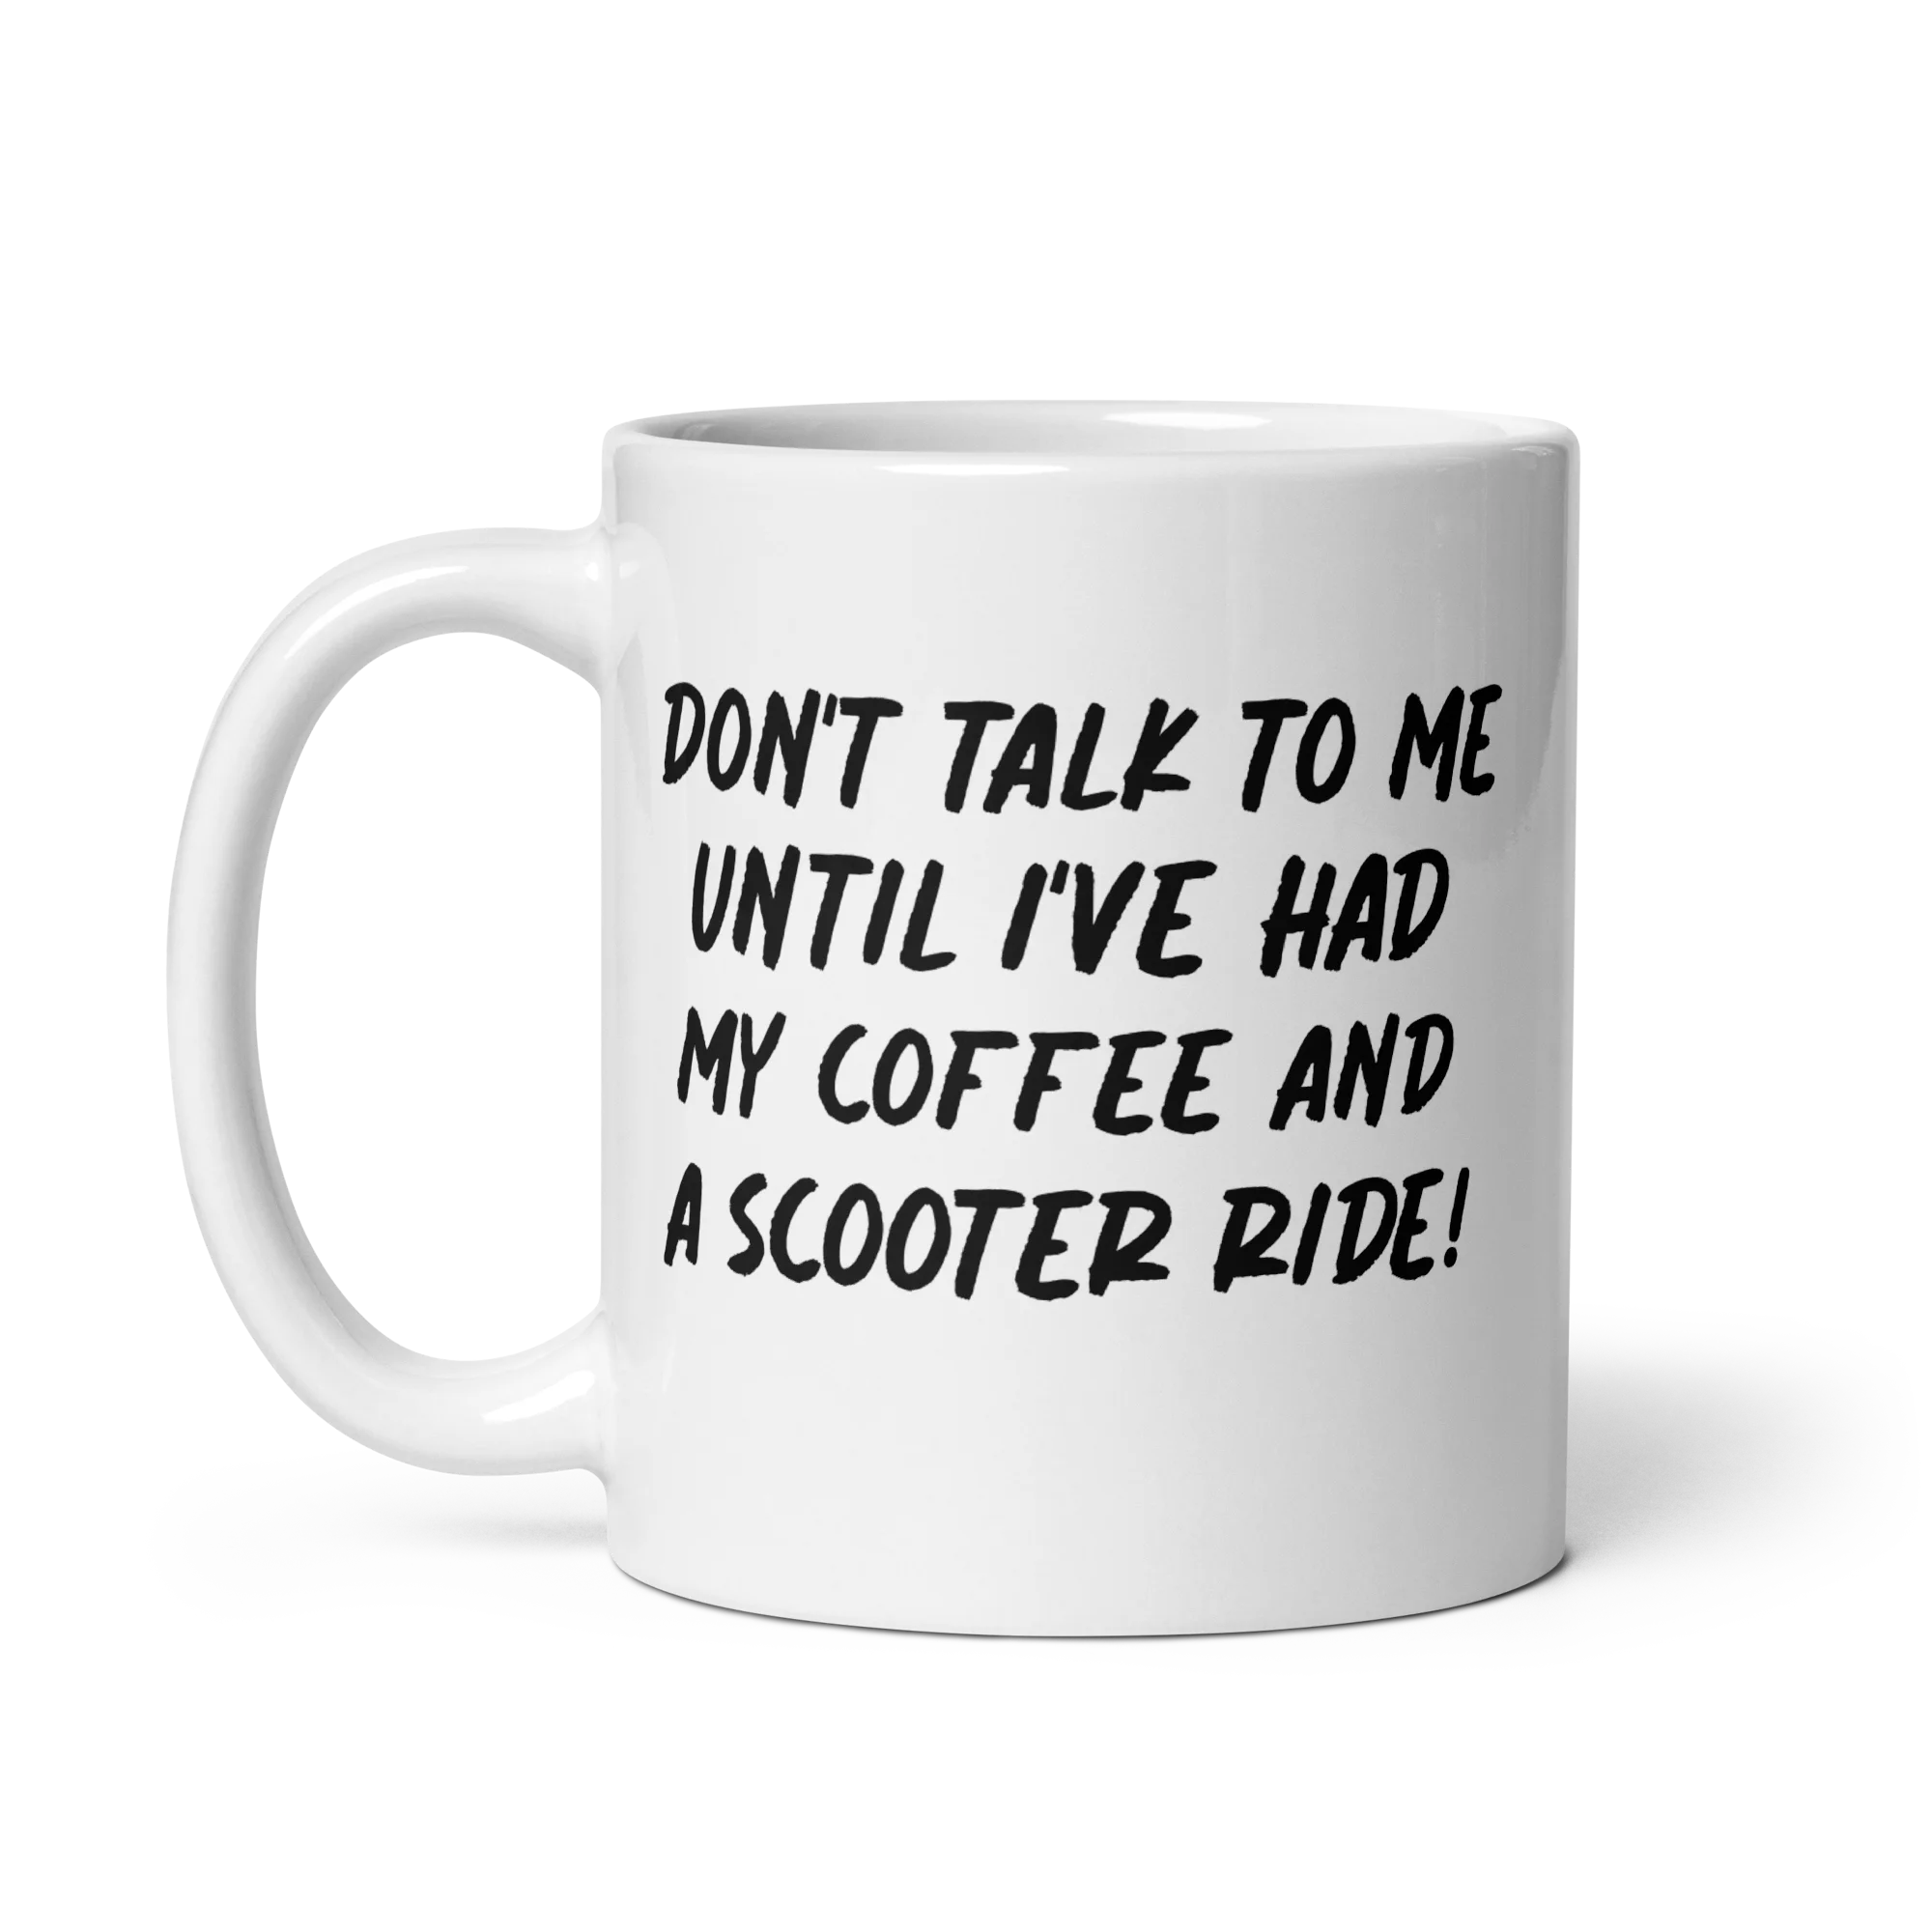 Electric Scooter Mug: Don't Talk To Me